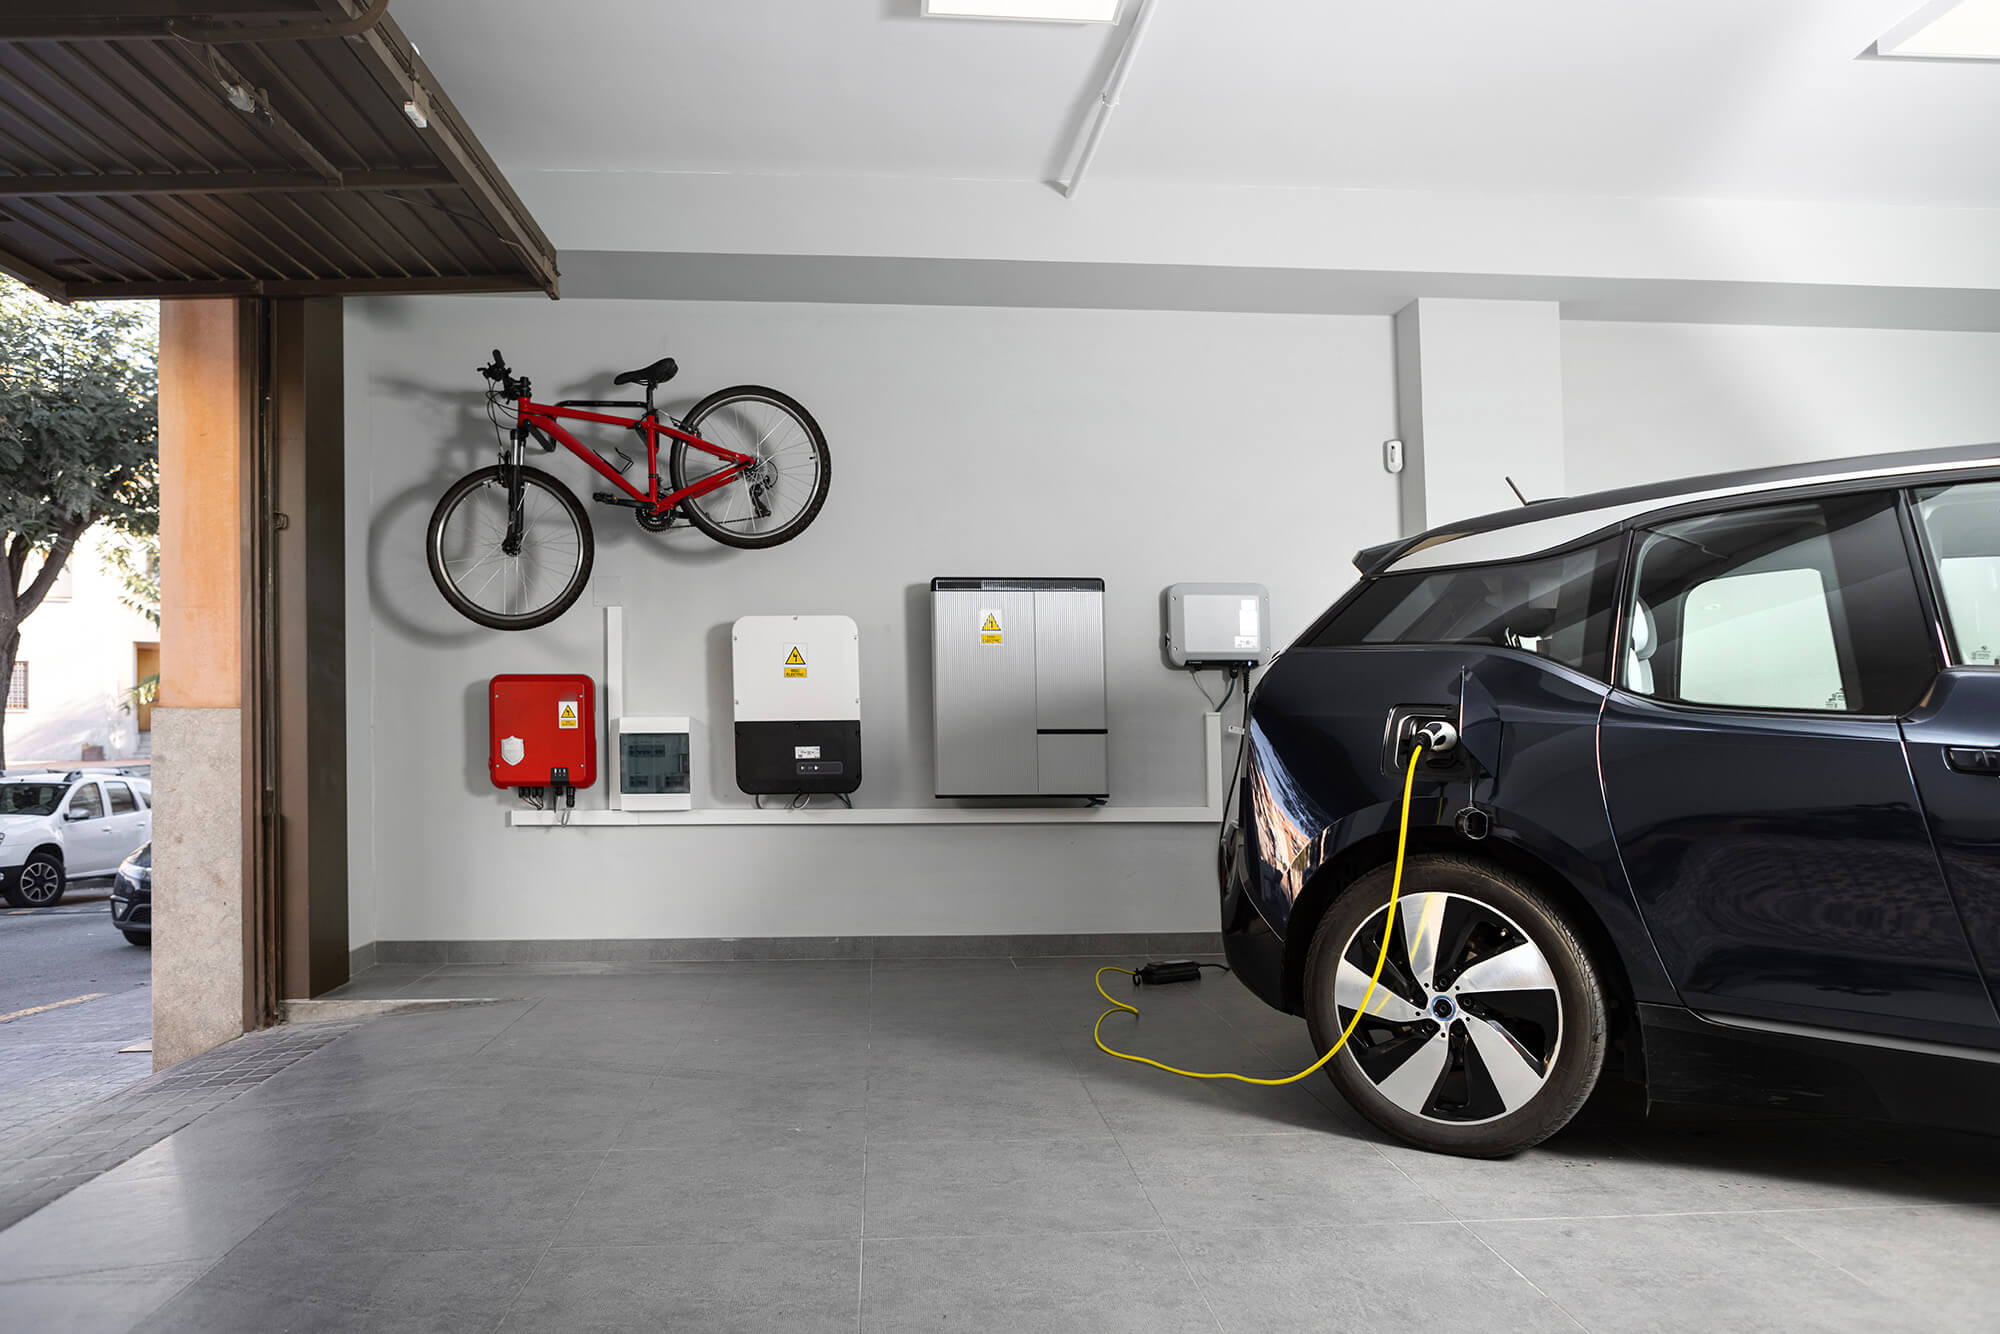 Home garage with electric vehicle charger installed in the wall